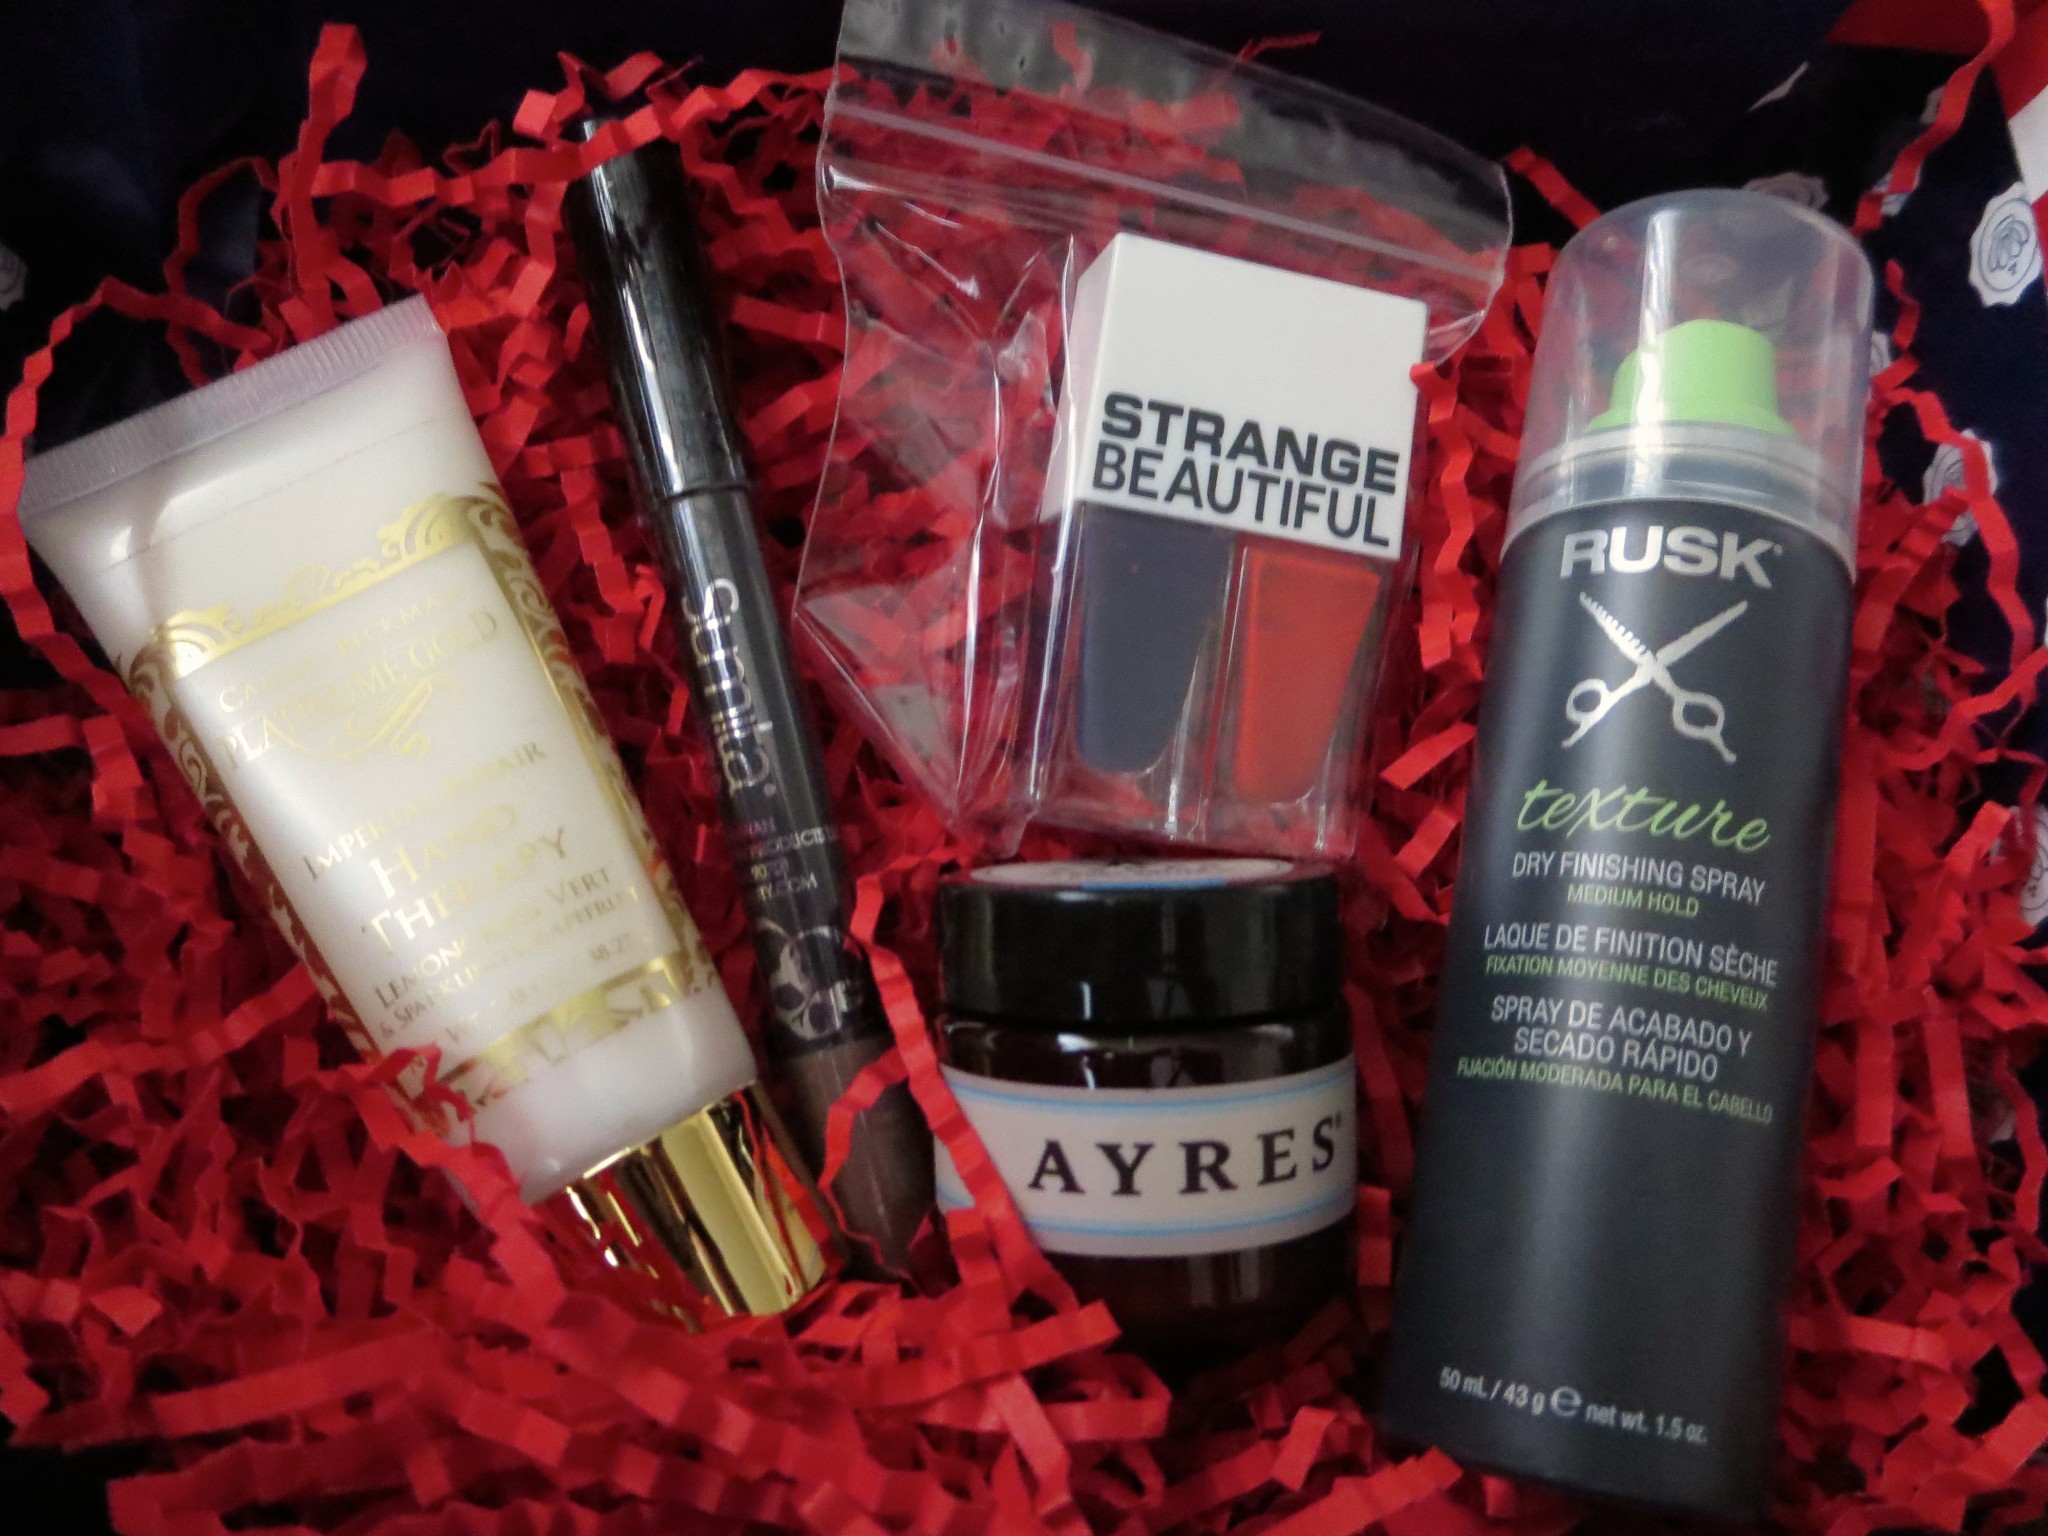 Contents of Stars and Stripes of GLOSSYBOX